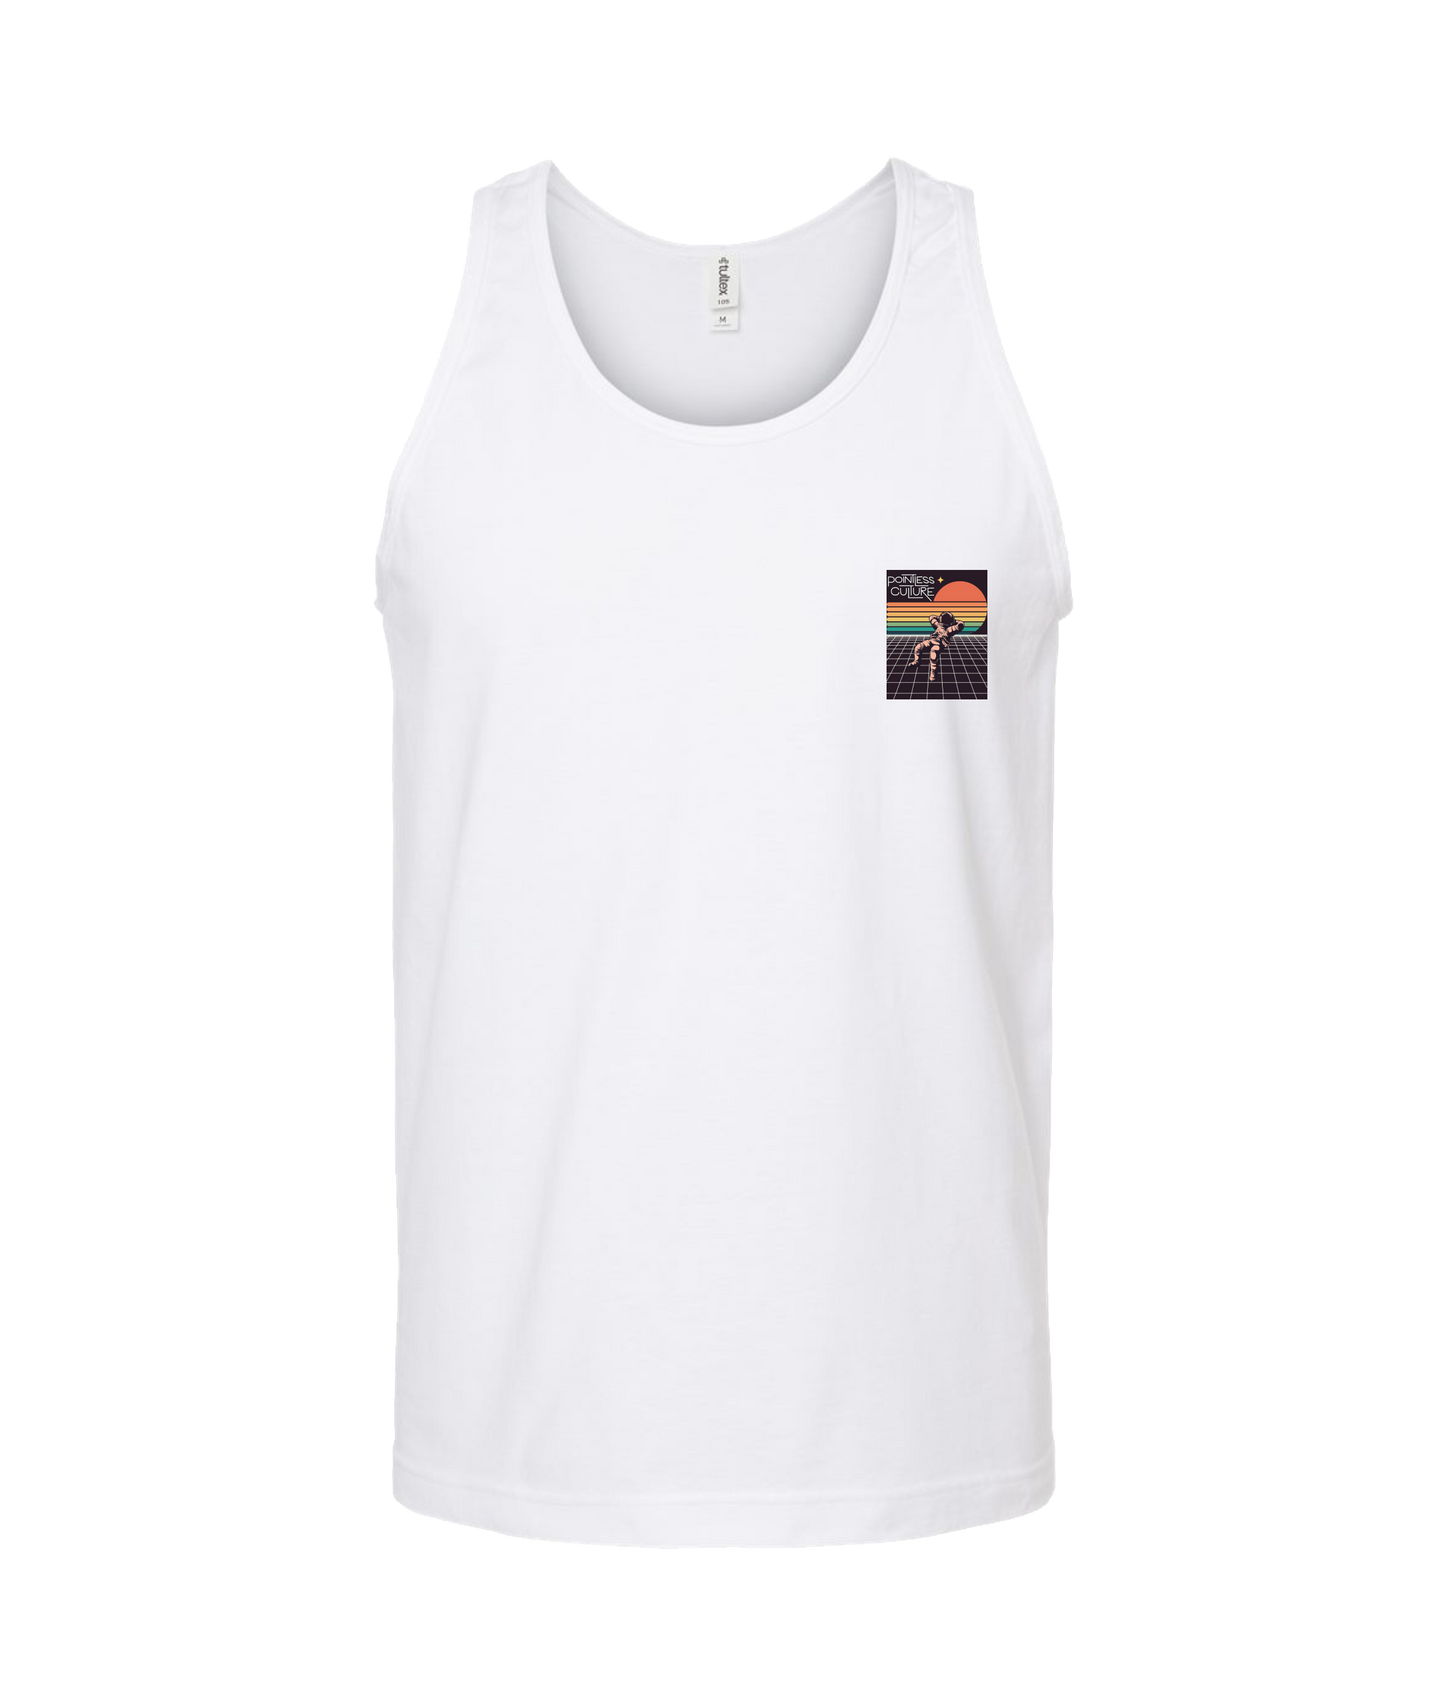 Pointless Culture - PC Astronaut - White Tank Top